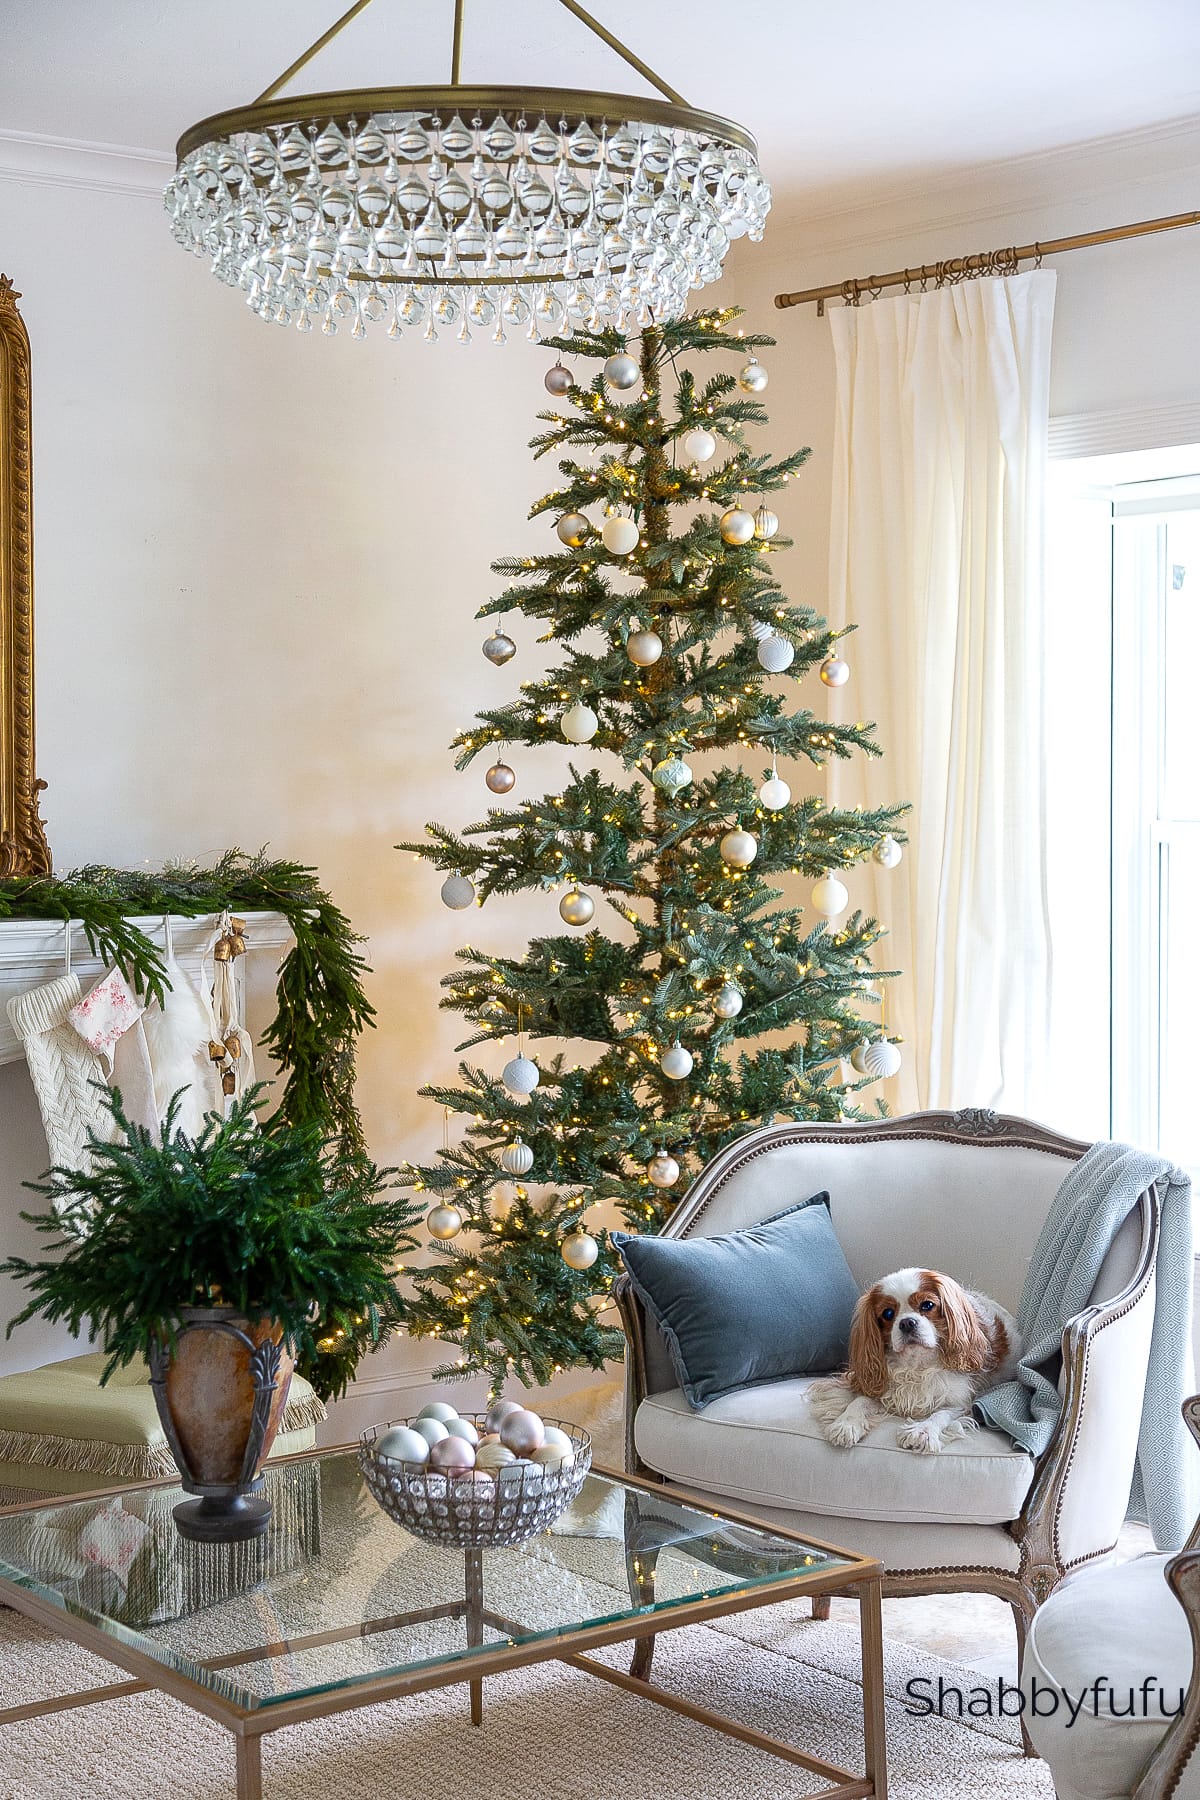 French style living room decorated for Christmas with Darby the Cavalier King Charles Spaniel